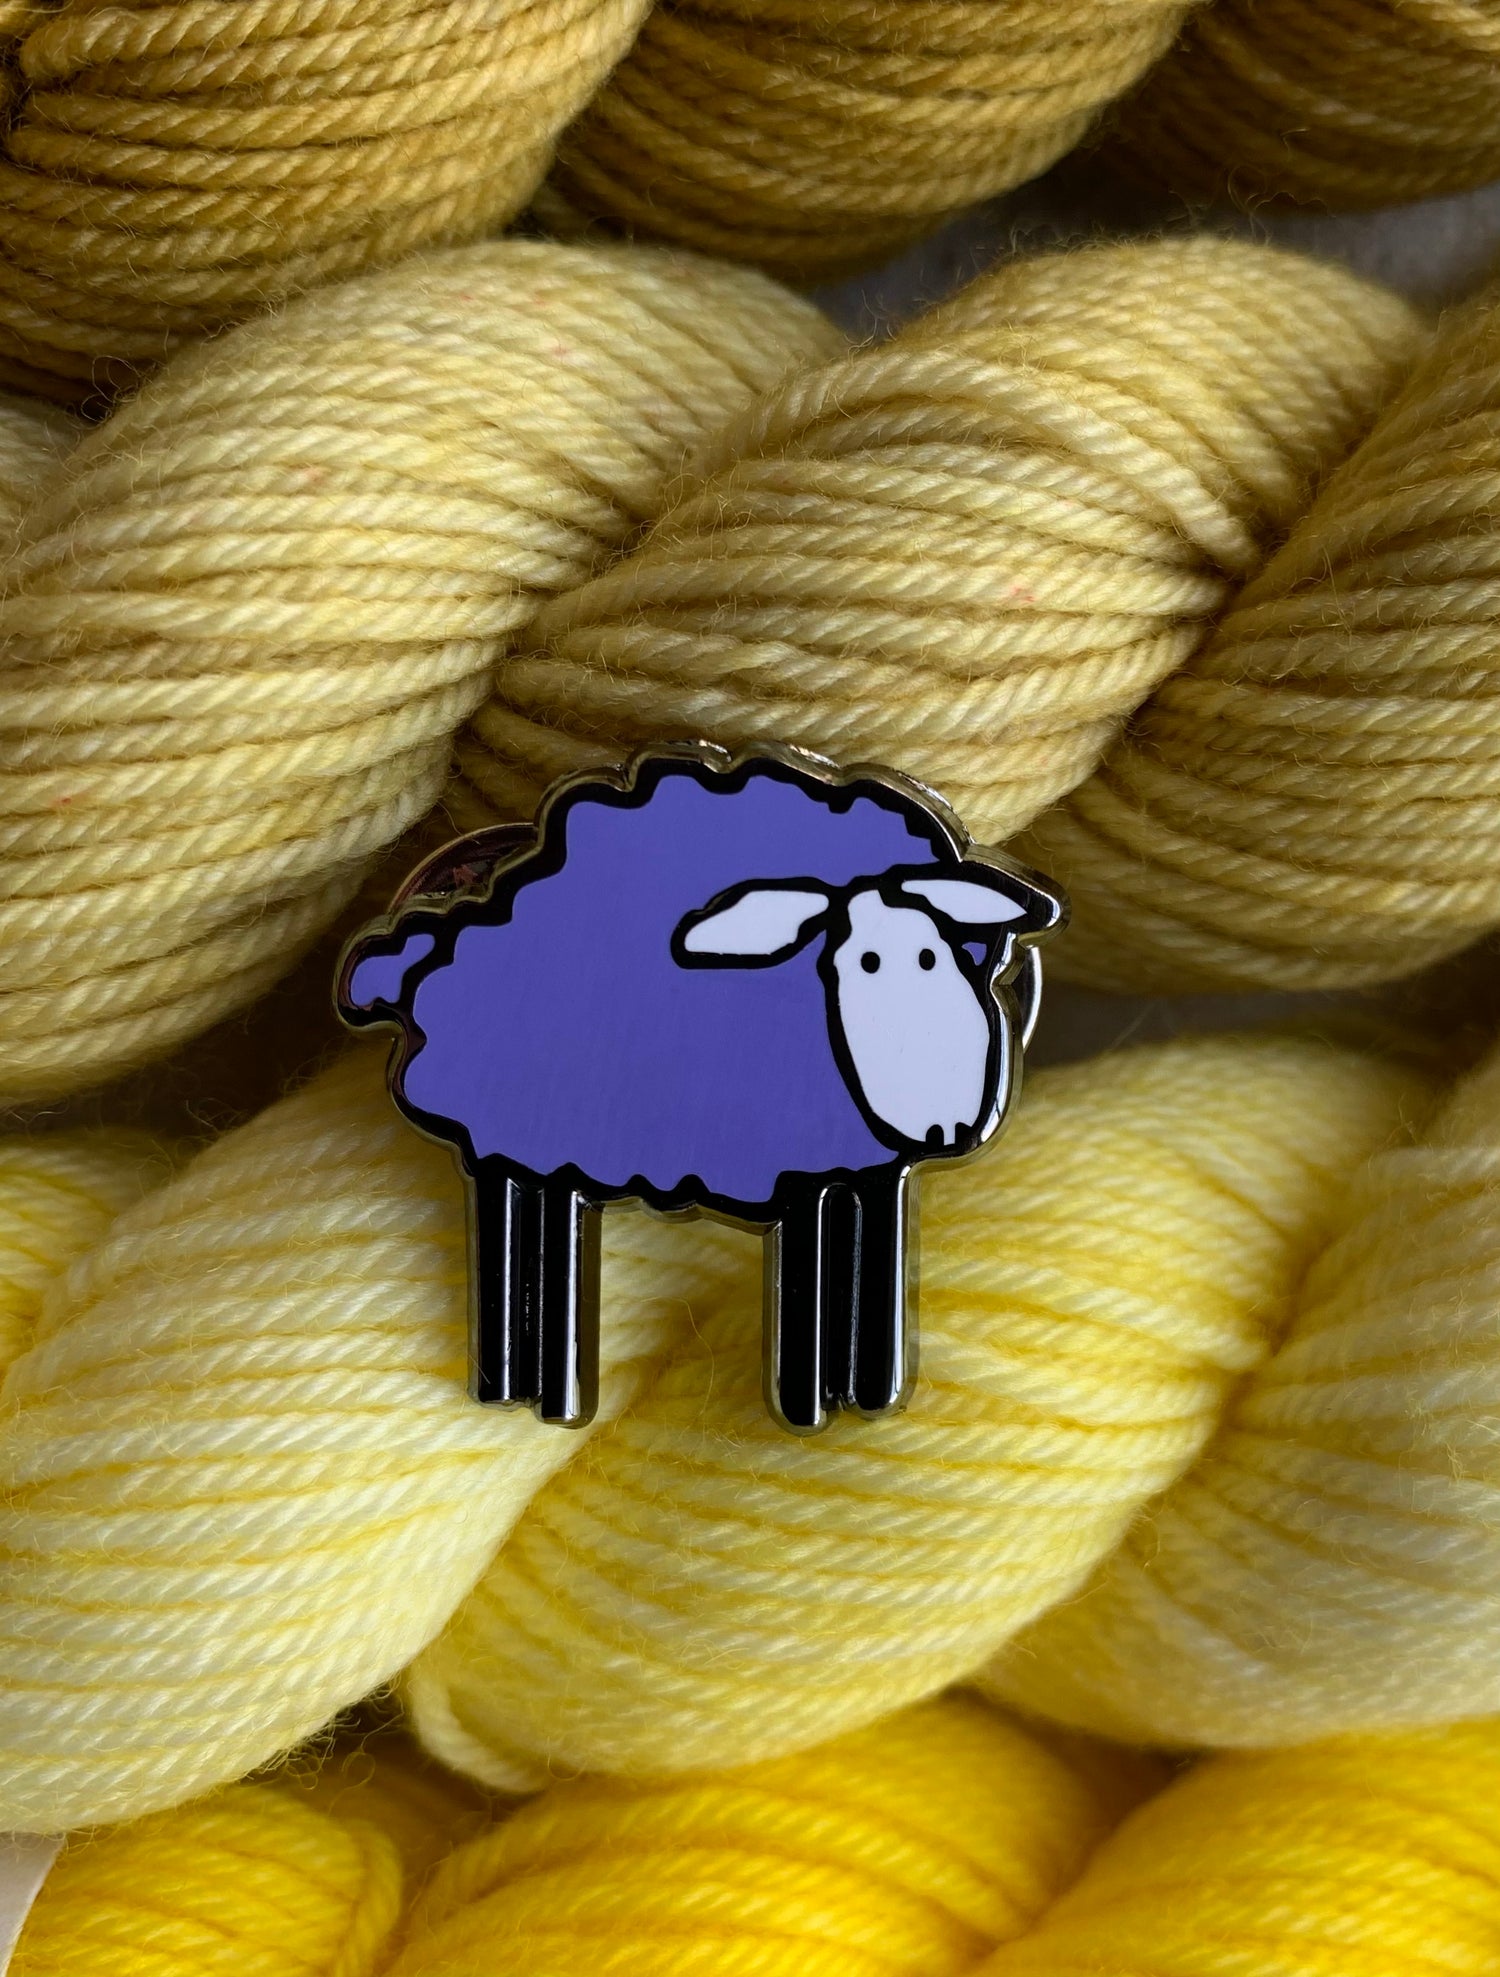 The Periwinkle Sheep